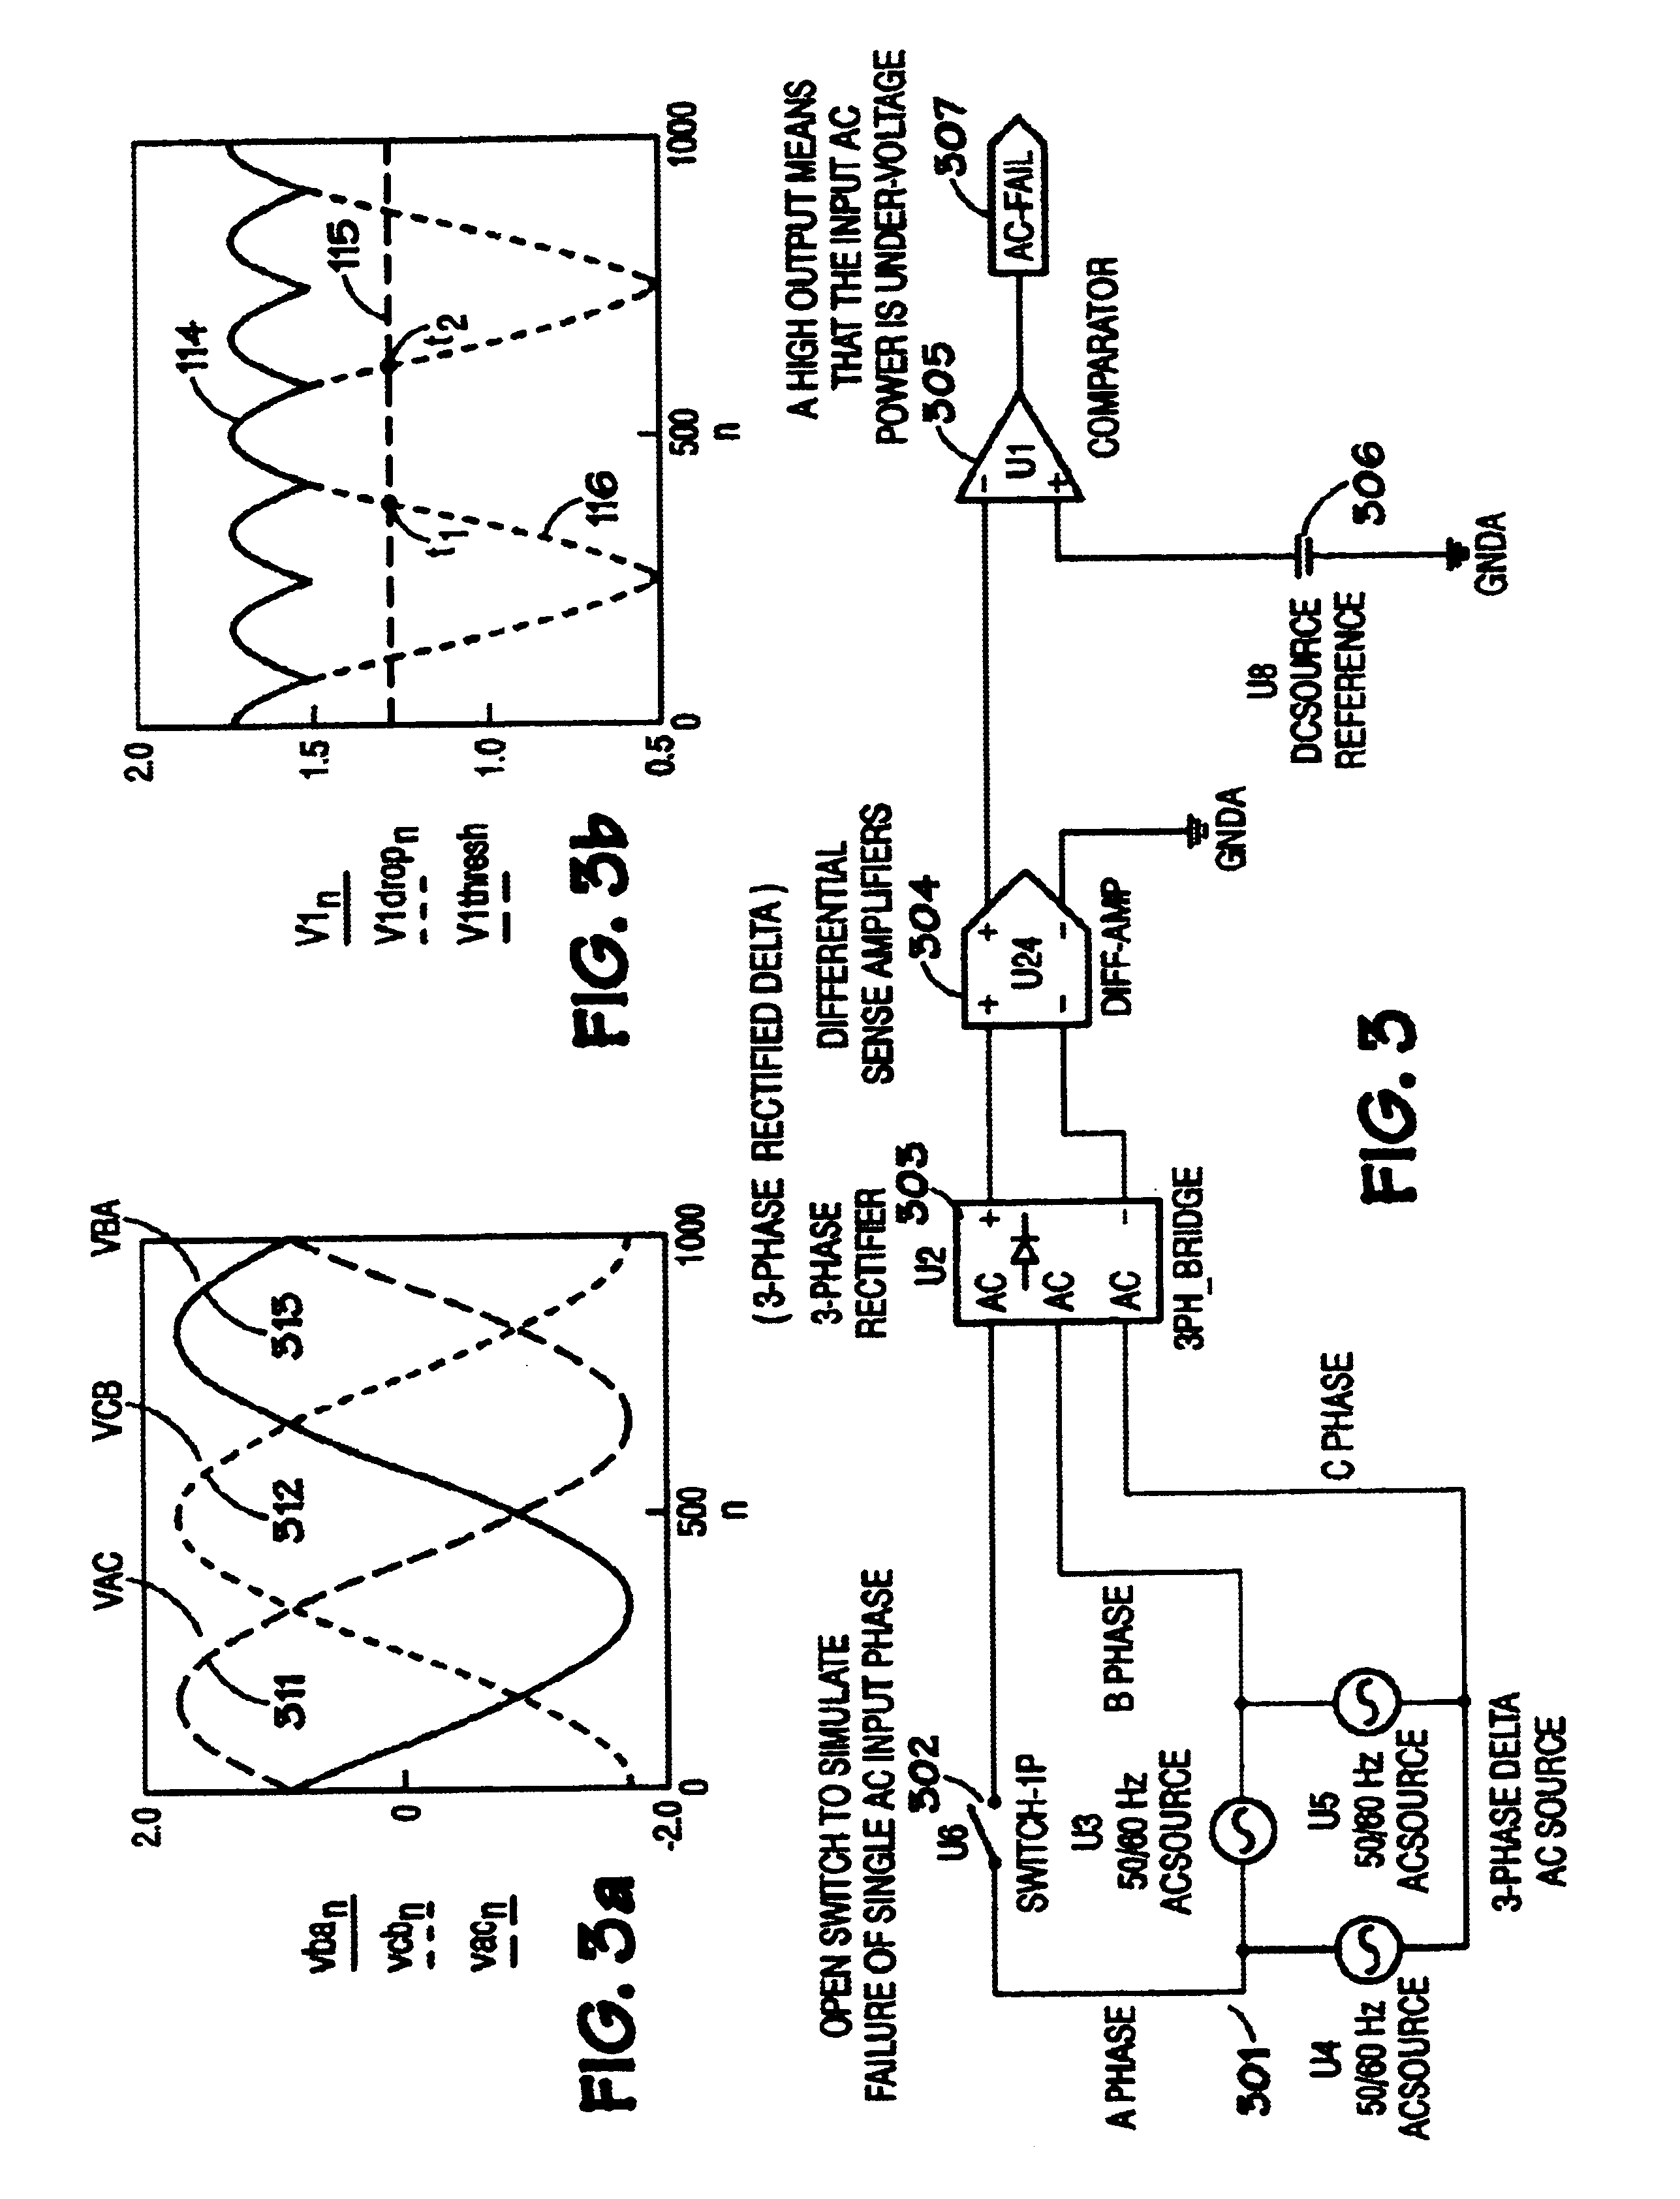 Method and apparatus for transfer control and undervoltage detection in an automatic transfer switch